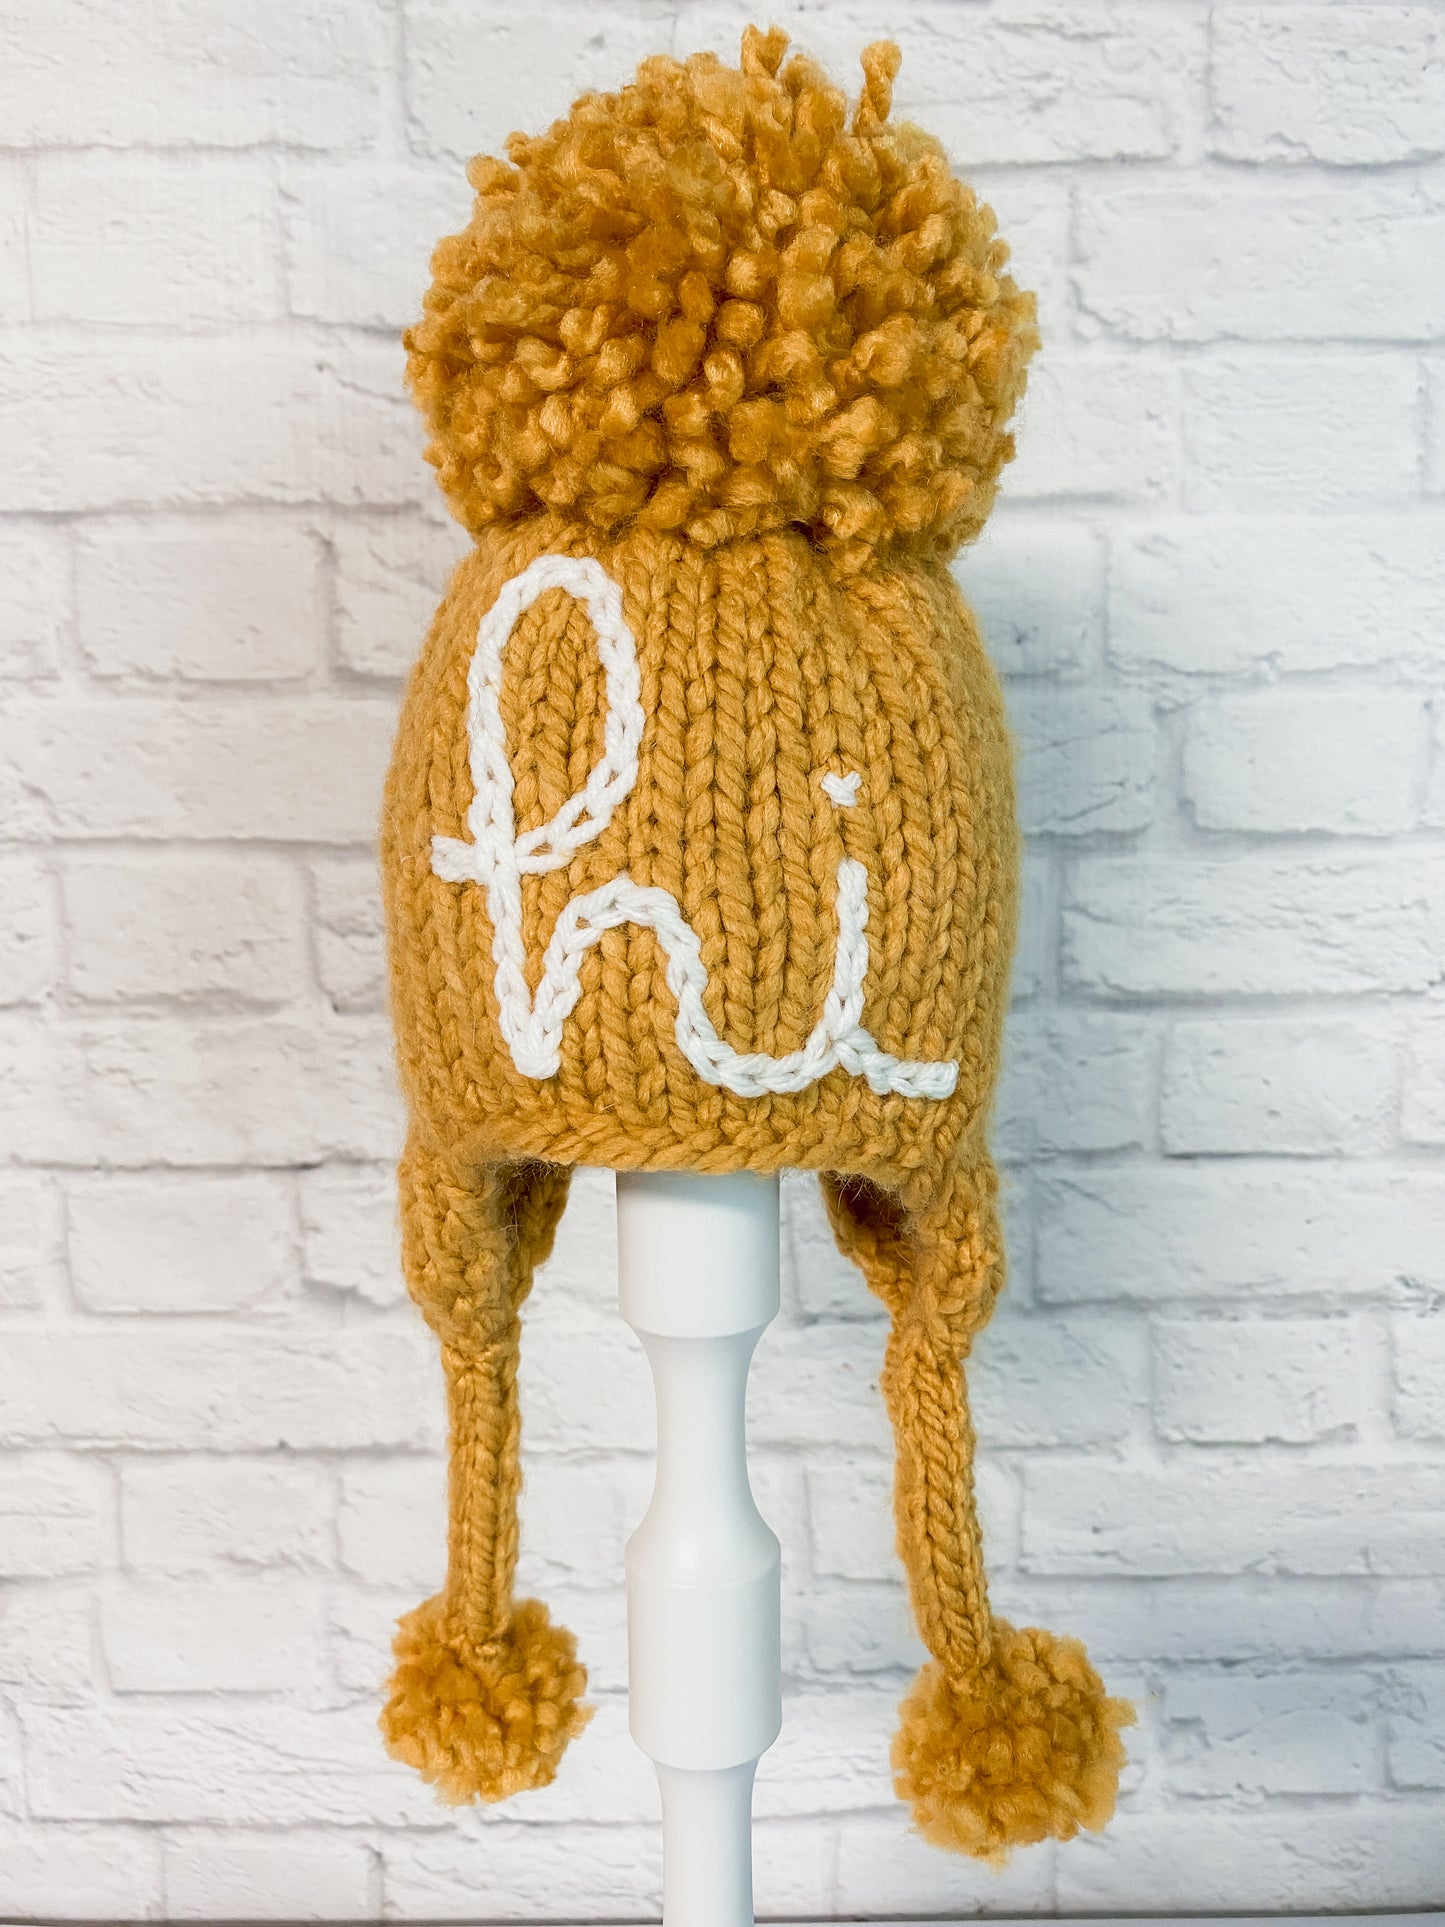 Knitted Hi Hat, Baby and Toddler Beanies for Pregnancy Announcement, Gender Reveal, Going Home Outfit